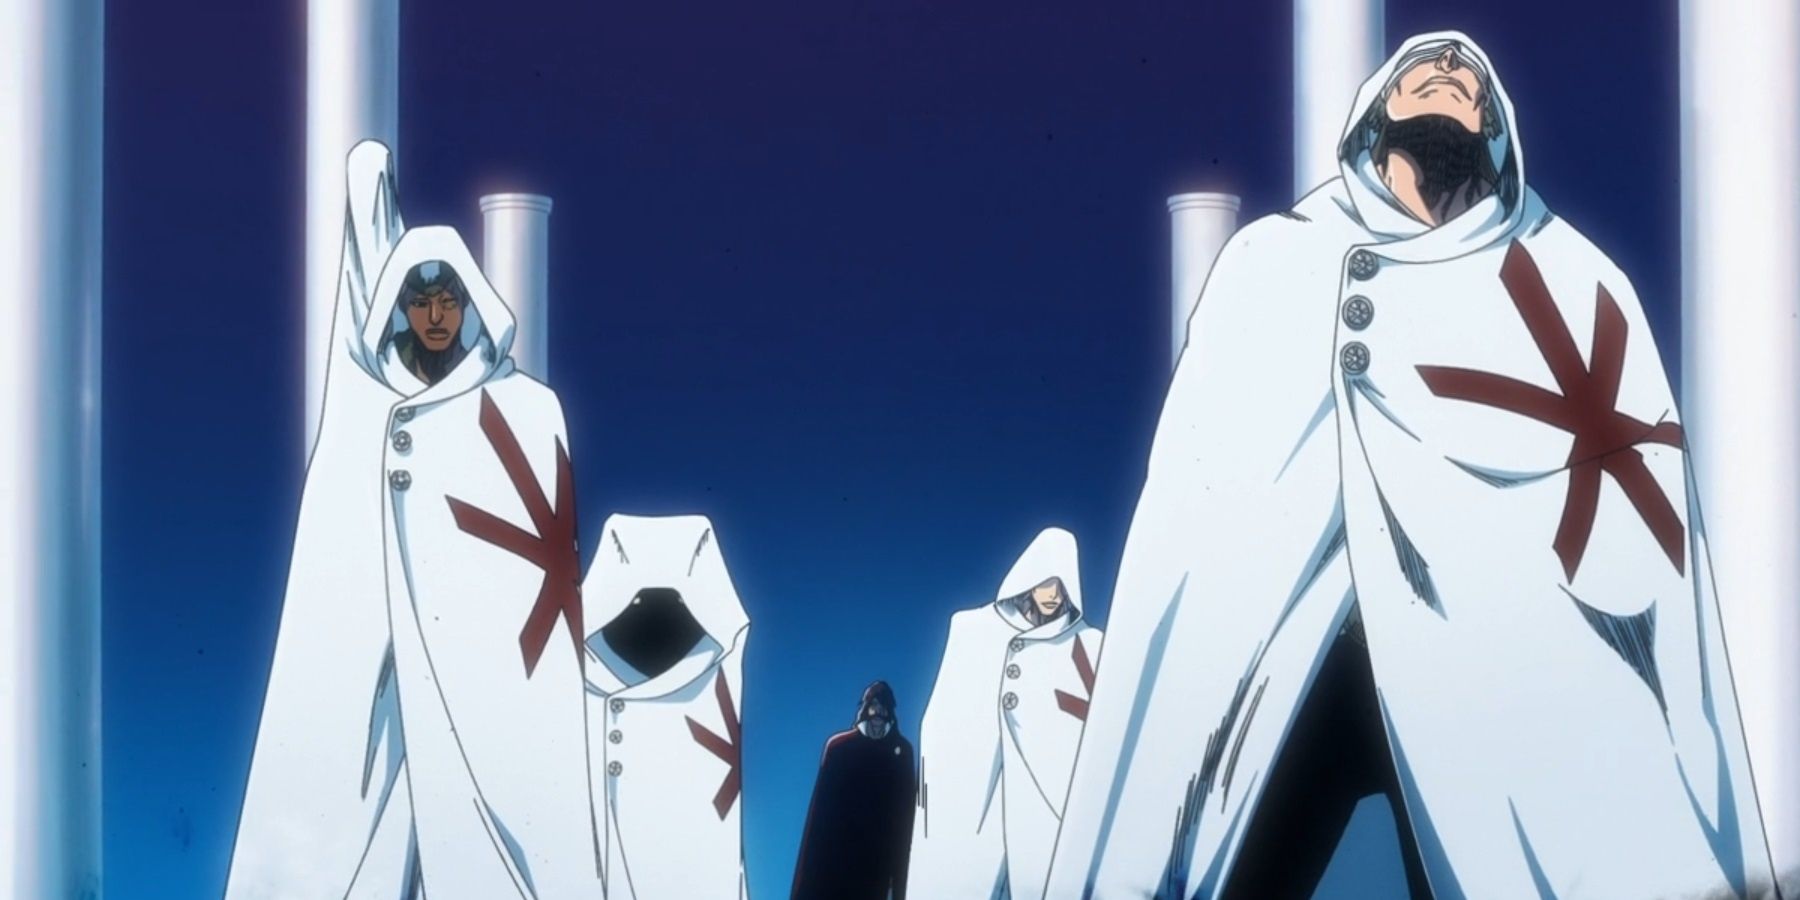 10 Burning Questions Bleach Fans Want Answered After TYBW Season 2